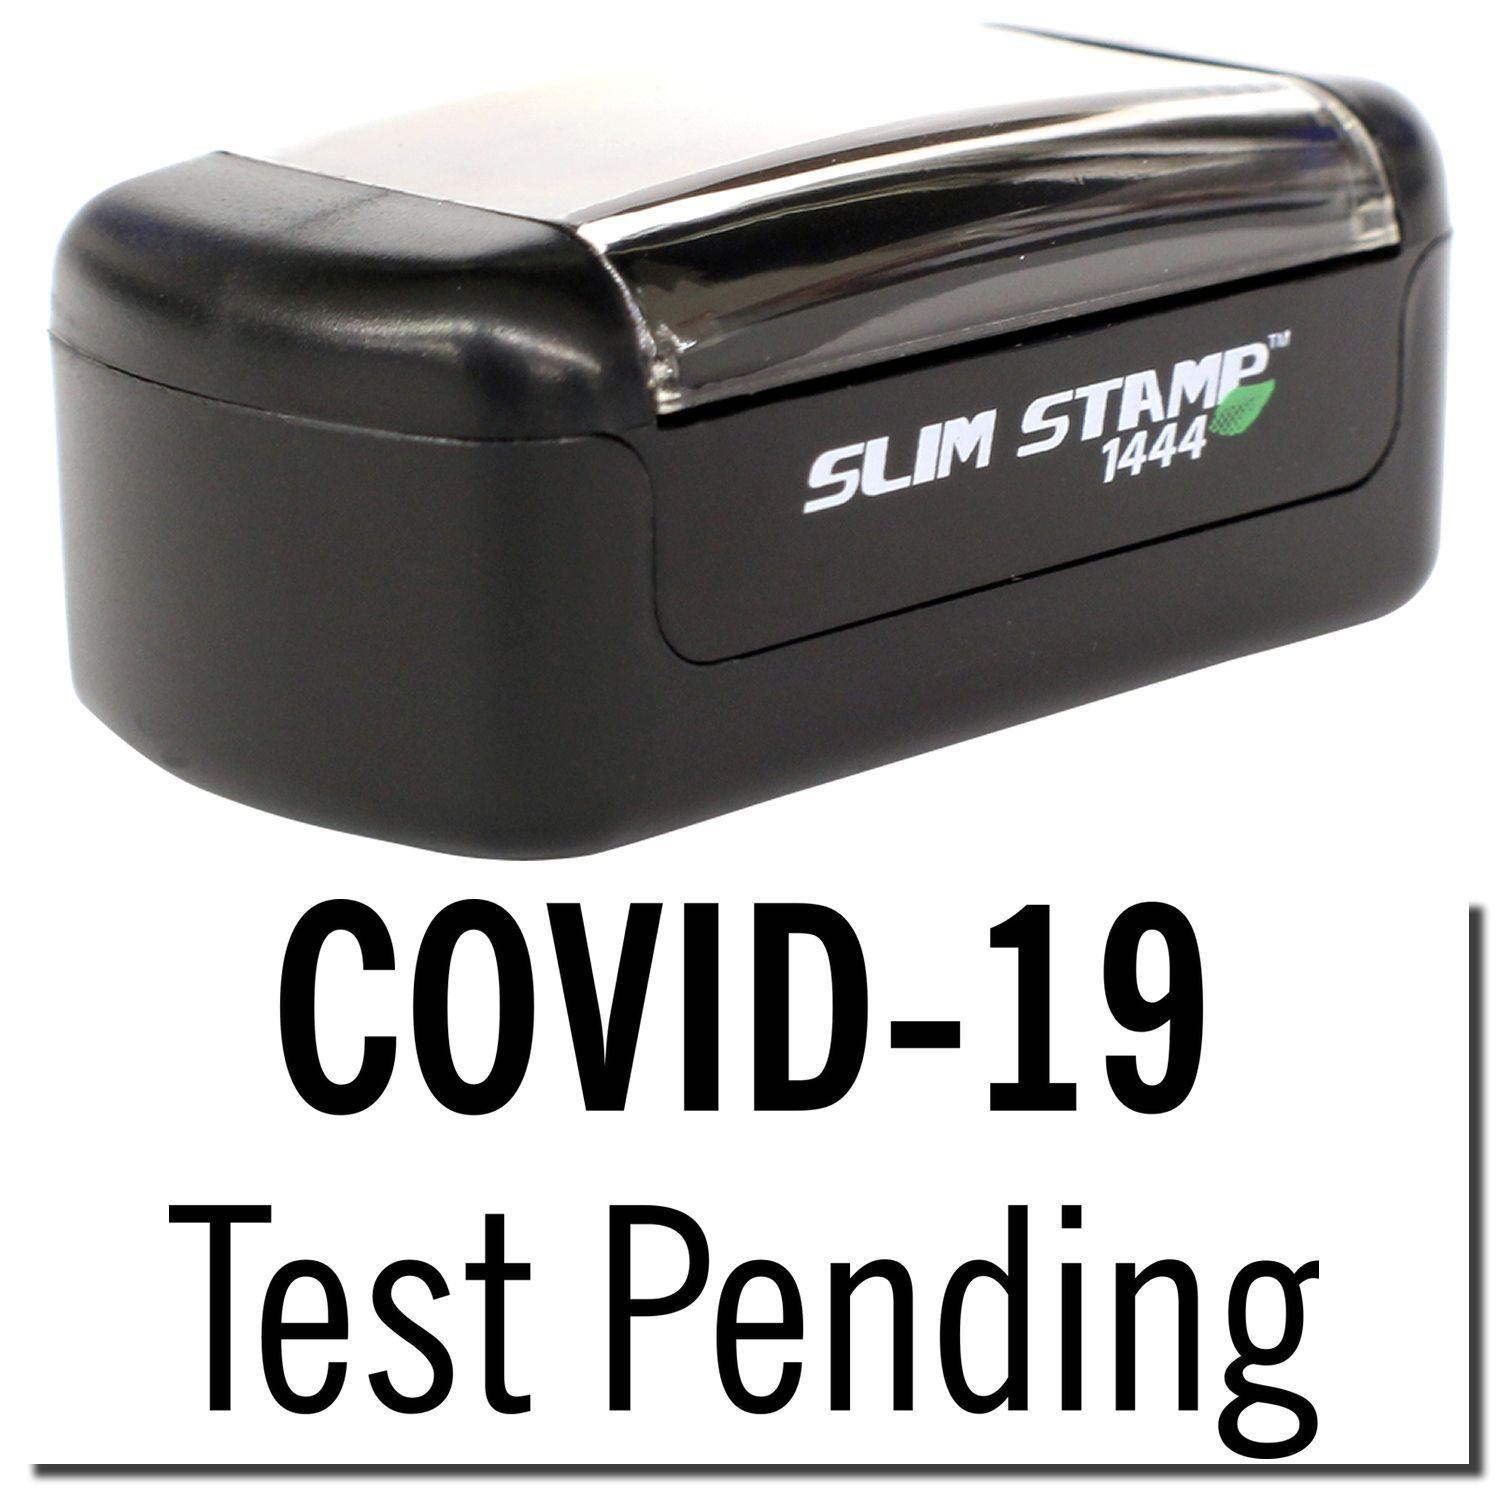 A stock office pre-inked stamp with a stamped image showing how the text "COVID-19 Test Pending" is displayed after stamping.